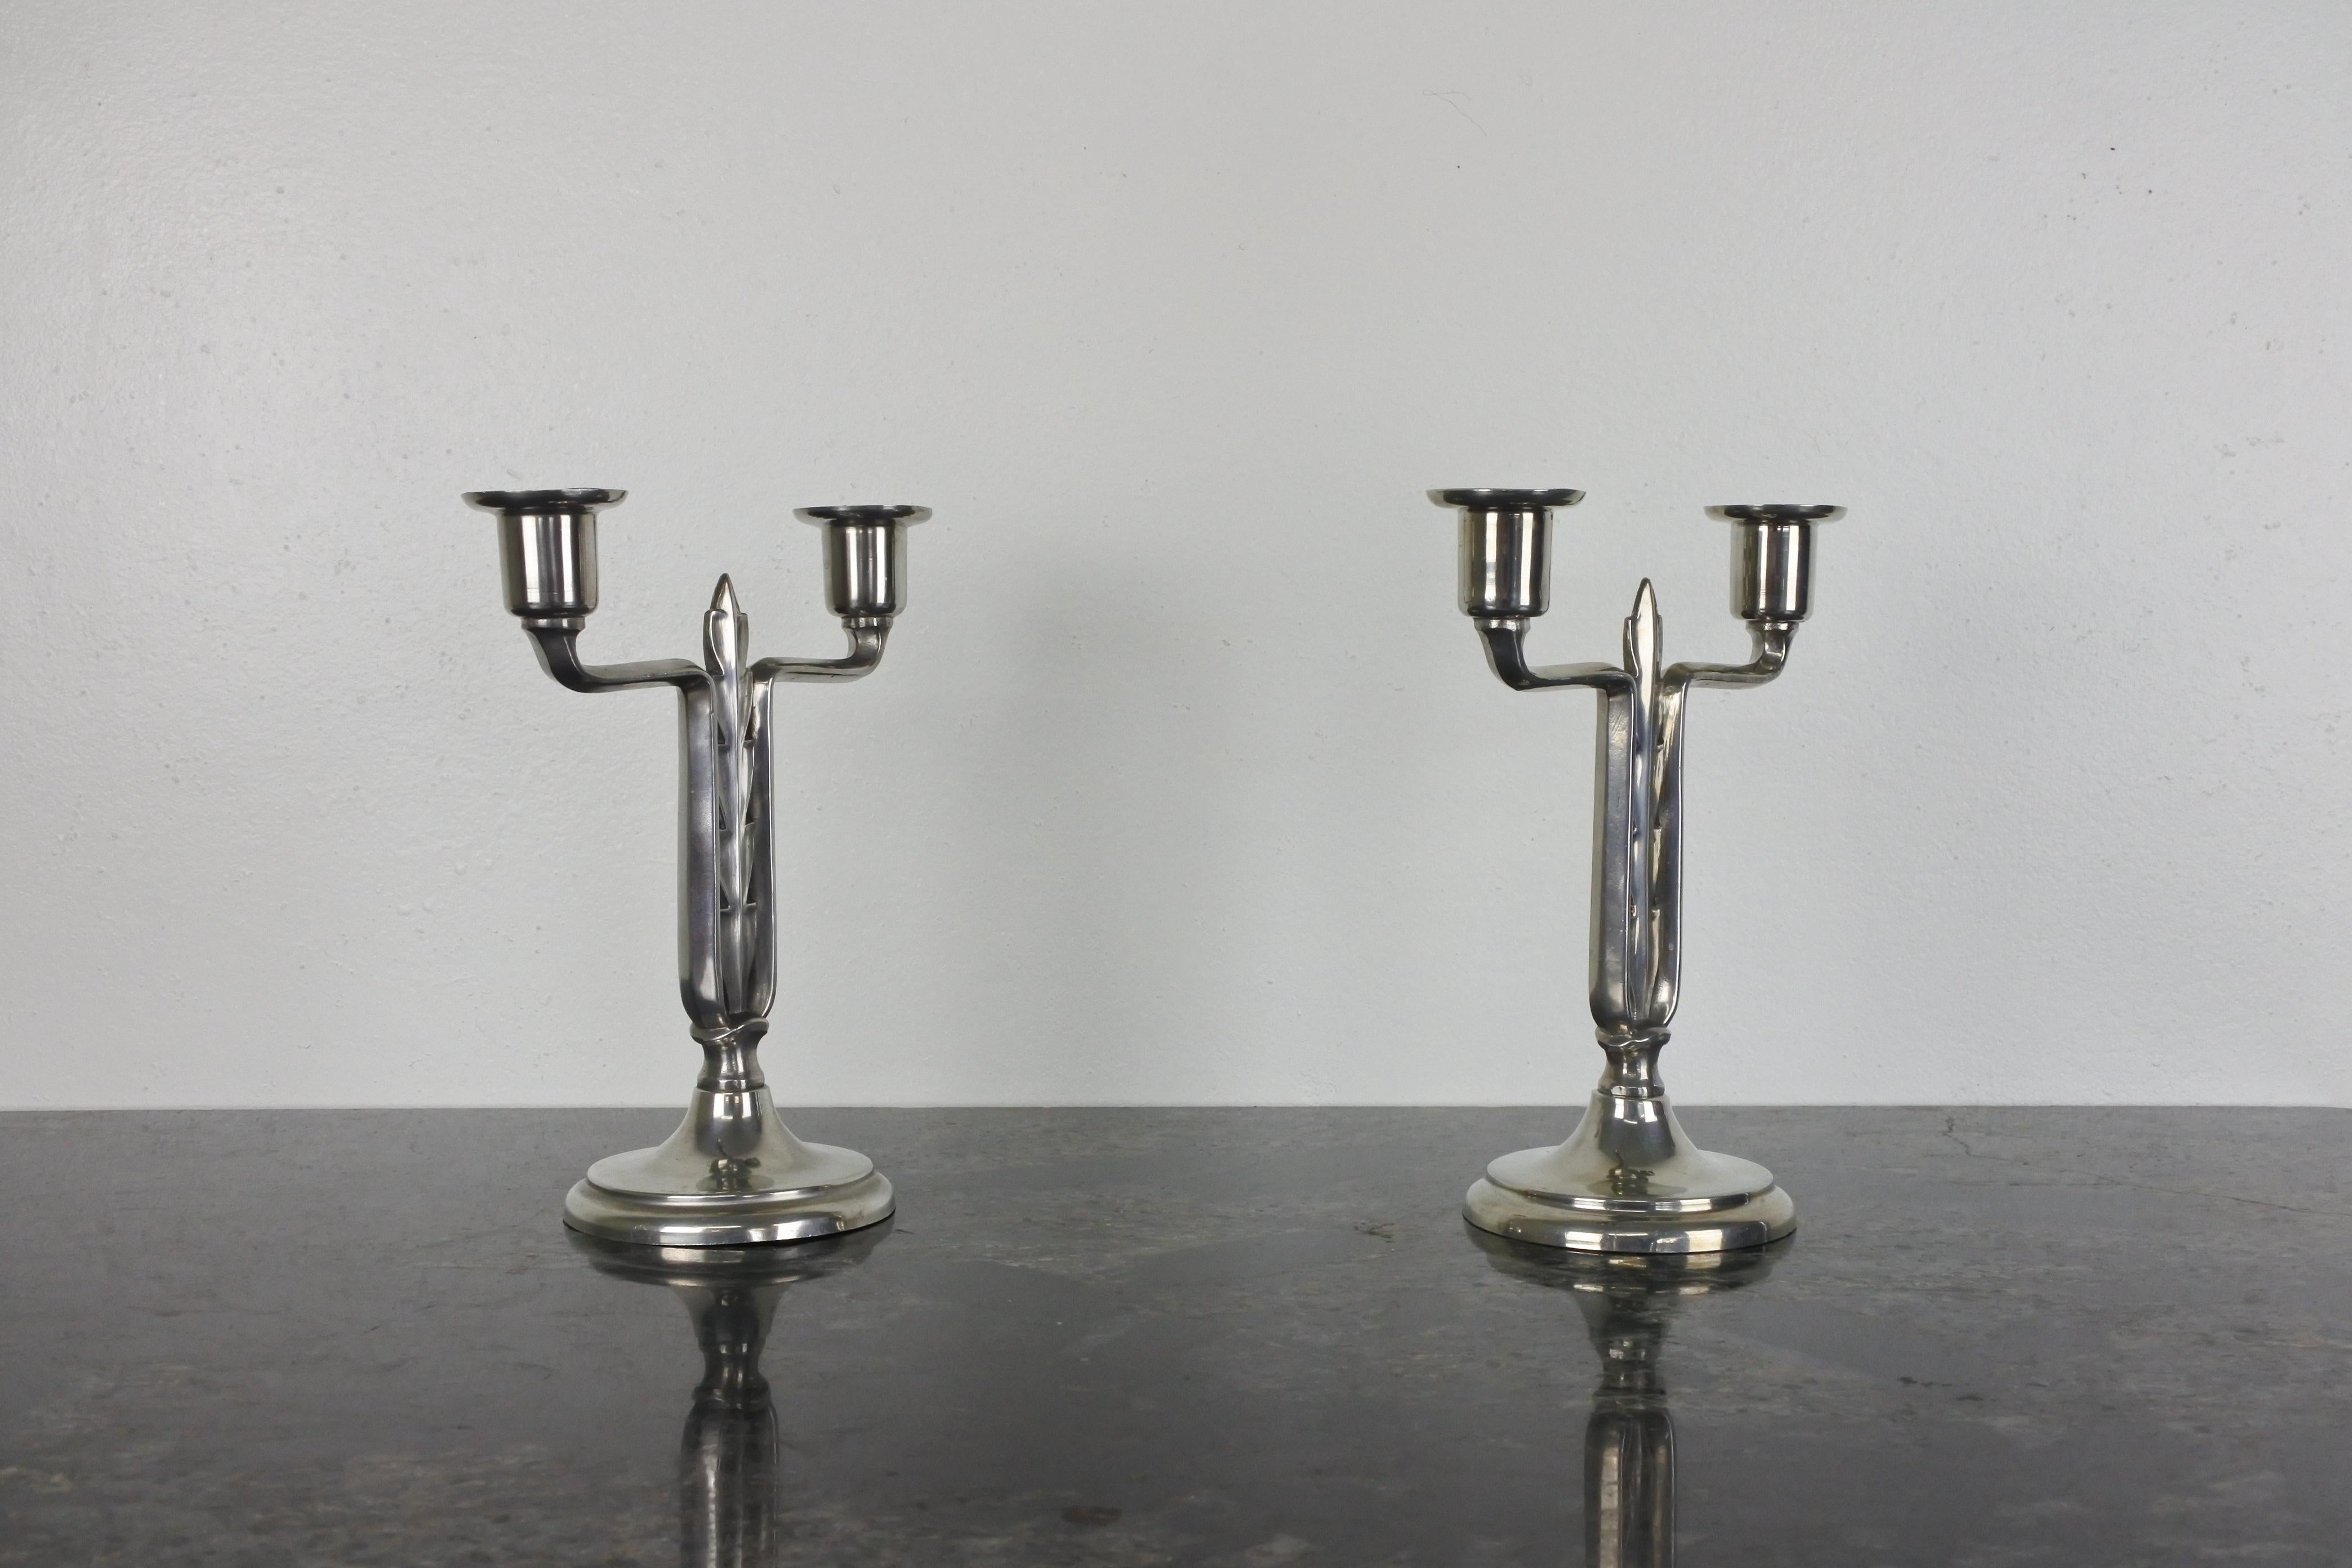 Pair of Art Deco silver plated metal candelabra by Paavo Tynell.
Model 8026.
Made in Finland by Taito in the 1930s.
Manufacturer's stamp on both.

Literature: OY Taito AB catalogue, 1933, page 51, Model number 8026.